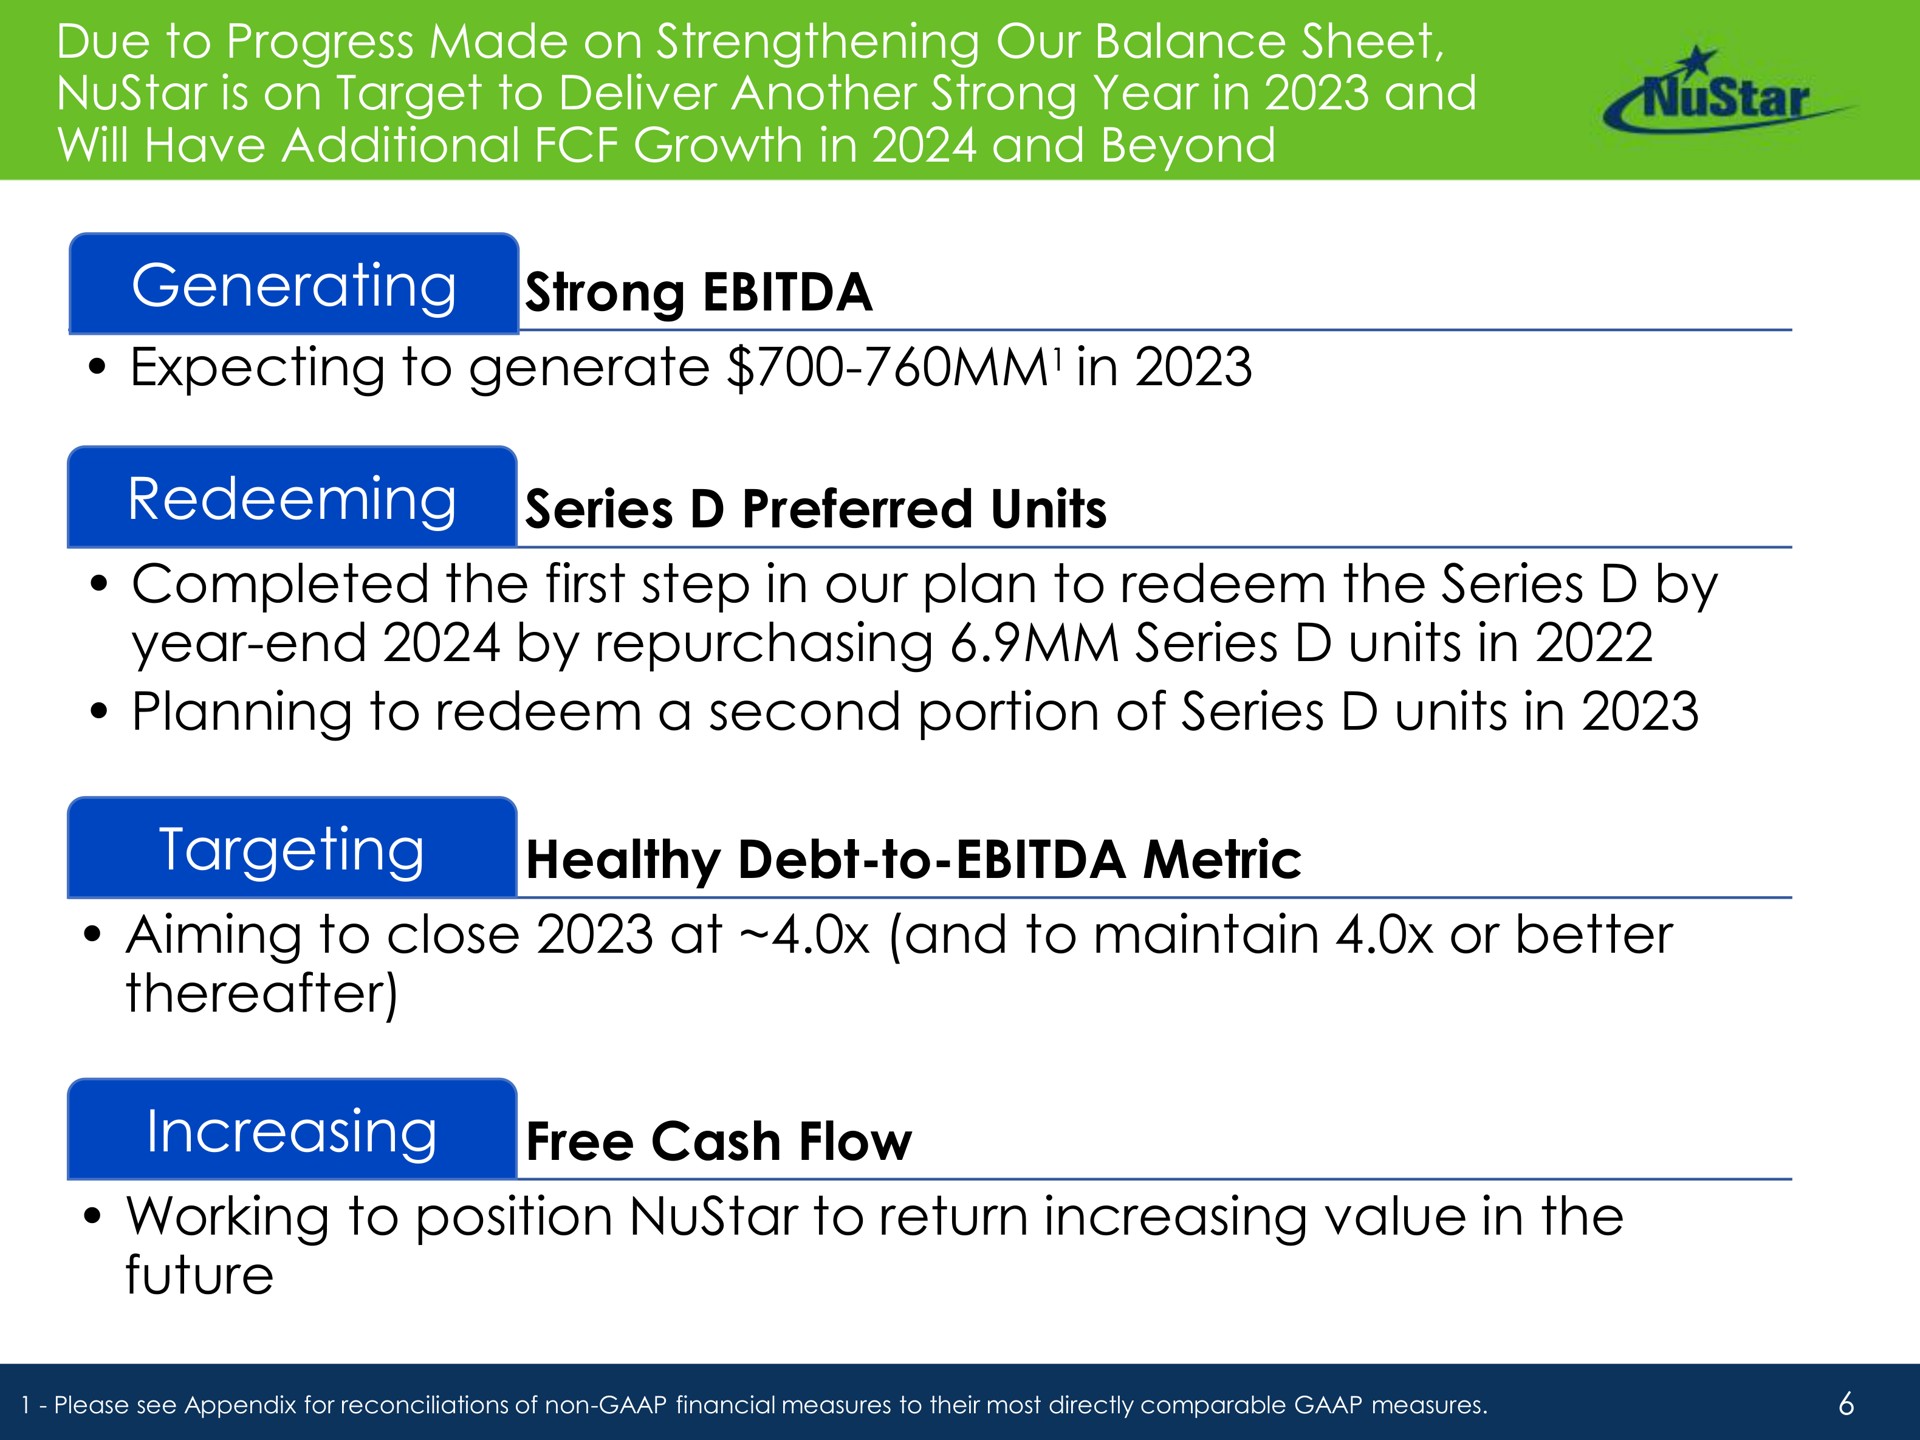 due to progress made on strengthening our balance sheet is on target to deliver another strong year in and will have additional growth in and beyond generating strong expecting to generate in redeeming series preferred units completed the first step in our plan to redeem the series by year end by repurchasing series units in planning to redeem a second portion of series units in targeting healthy debt to metric aiming to close at and to maintain or better thereafter increasing free cash flow working to position to return increasing value in the future | NuStar Energy